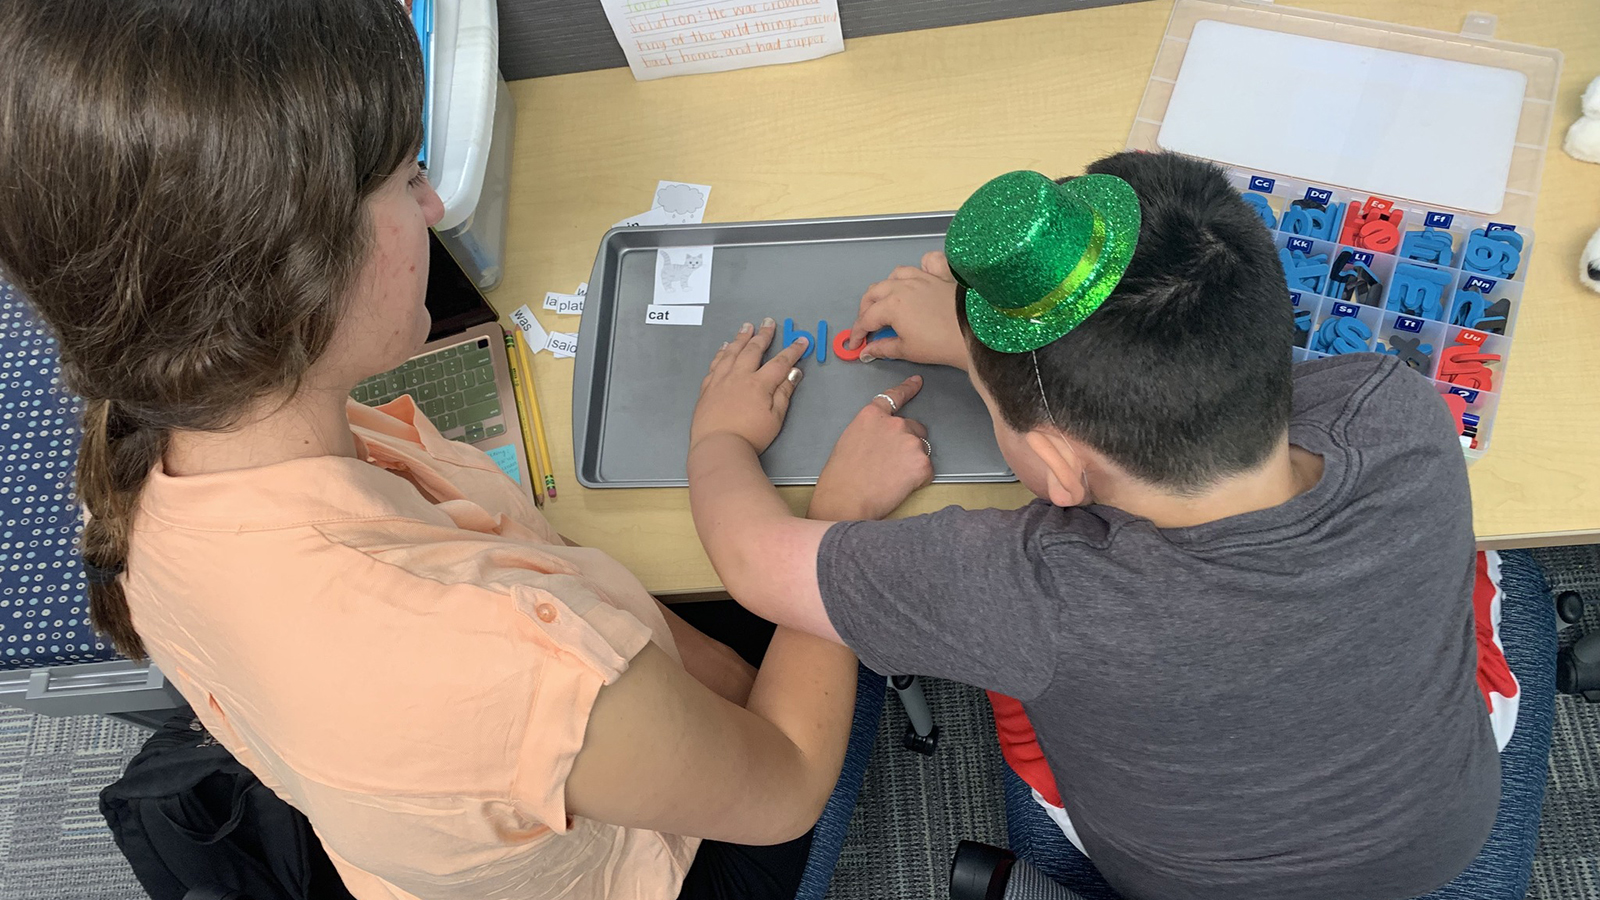 Devin Shaughnessy, an elementary and special education major, helps Max Petersen build words during a tutoring session at the Schmoker Reading Center 